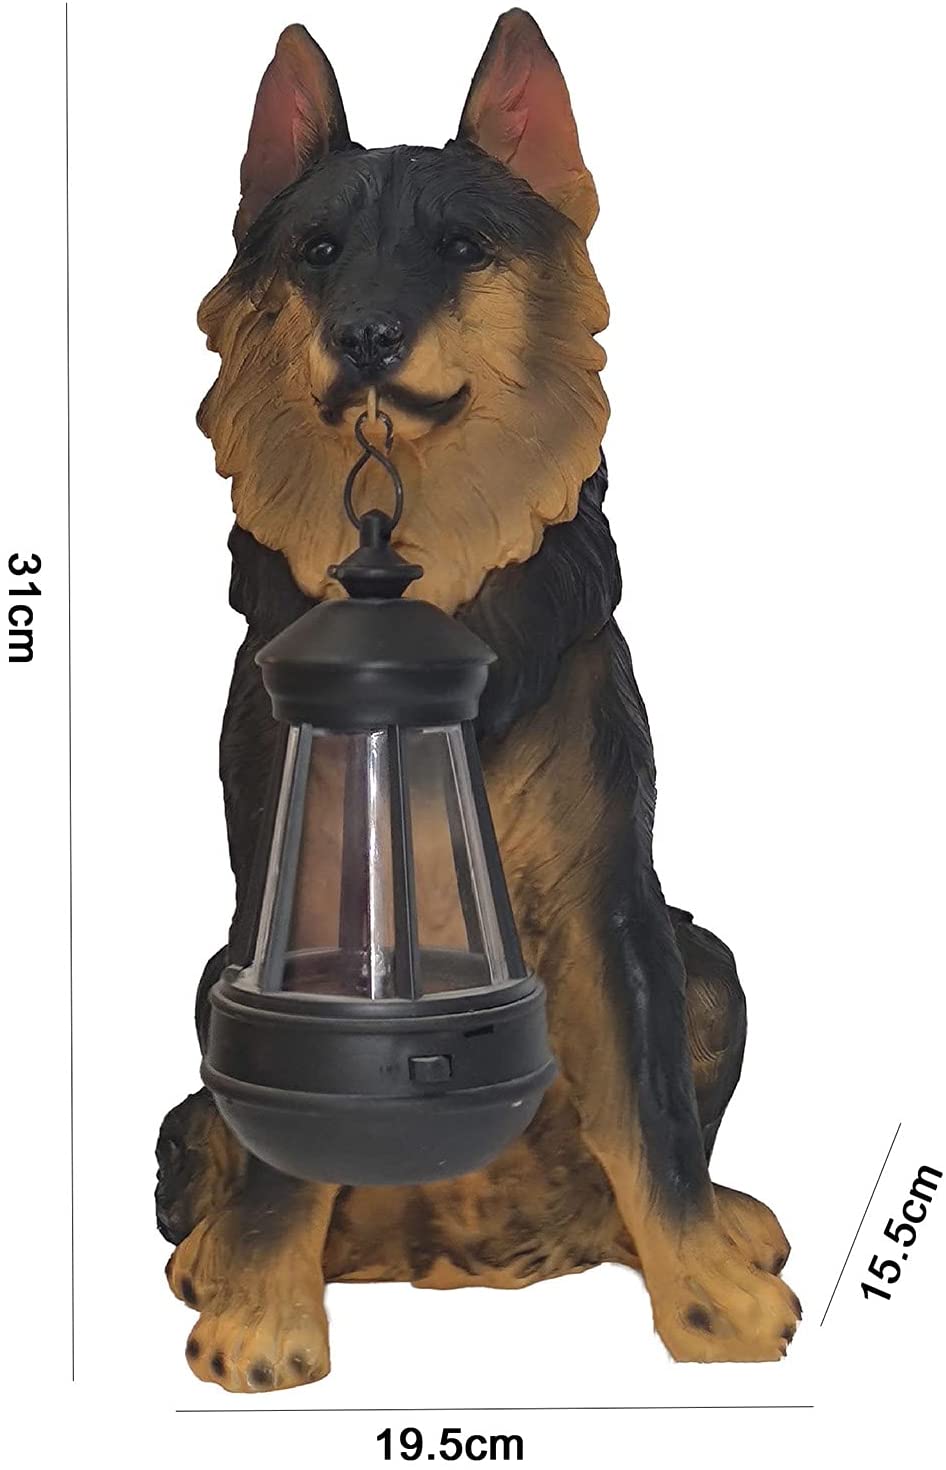 Garden Dog Statues Sculptures,Outdoor Dog Puppy Statue with Solar Led Light,Resin  Dog Figurine Ornaments for Garden Lawn Patio Realistic Dog Decor Gift 